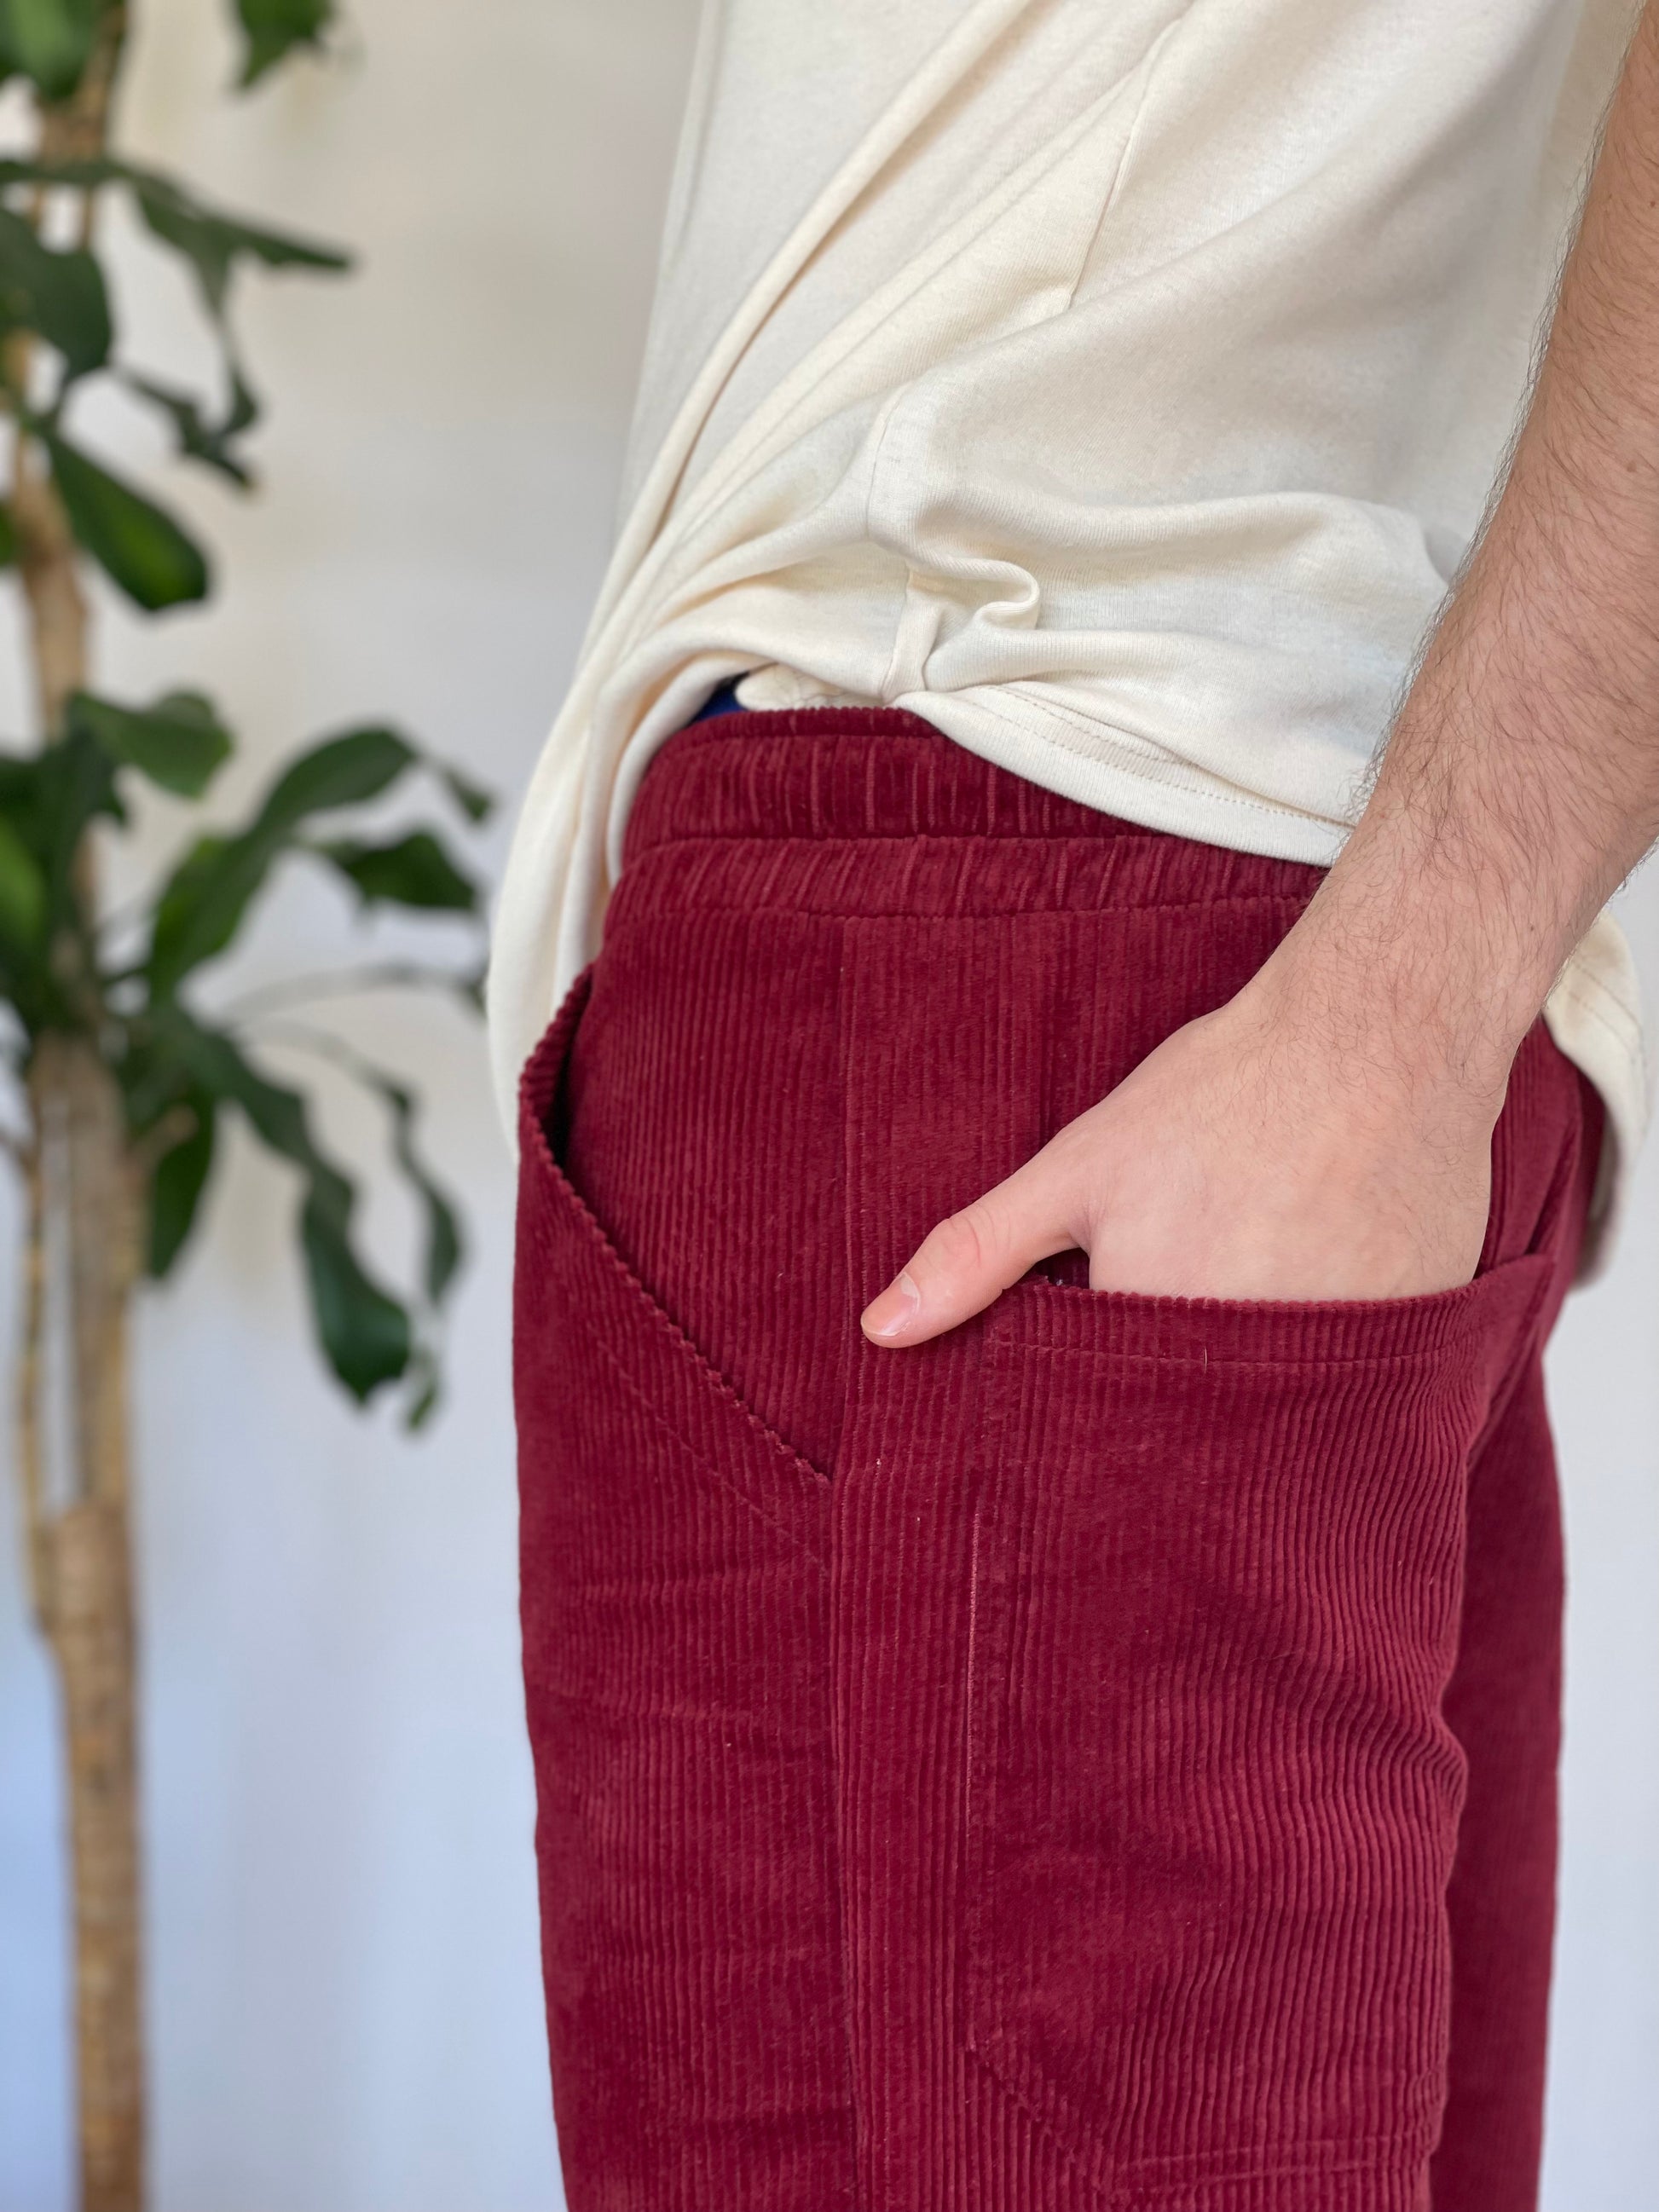 Close up of models hand in back pocket. Models wears burgundy corduroy pants and a cream t-shirt